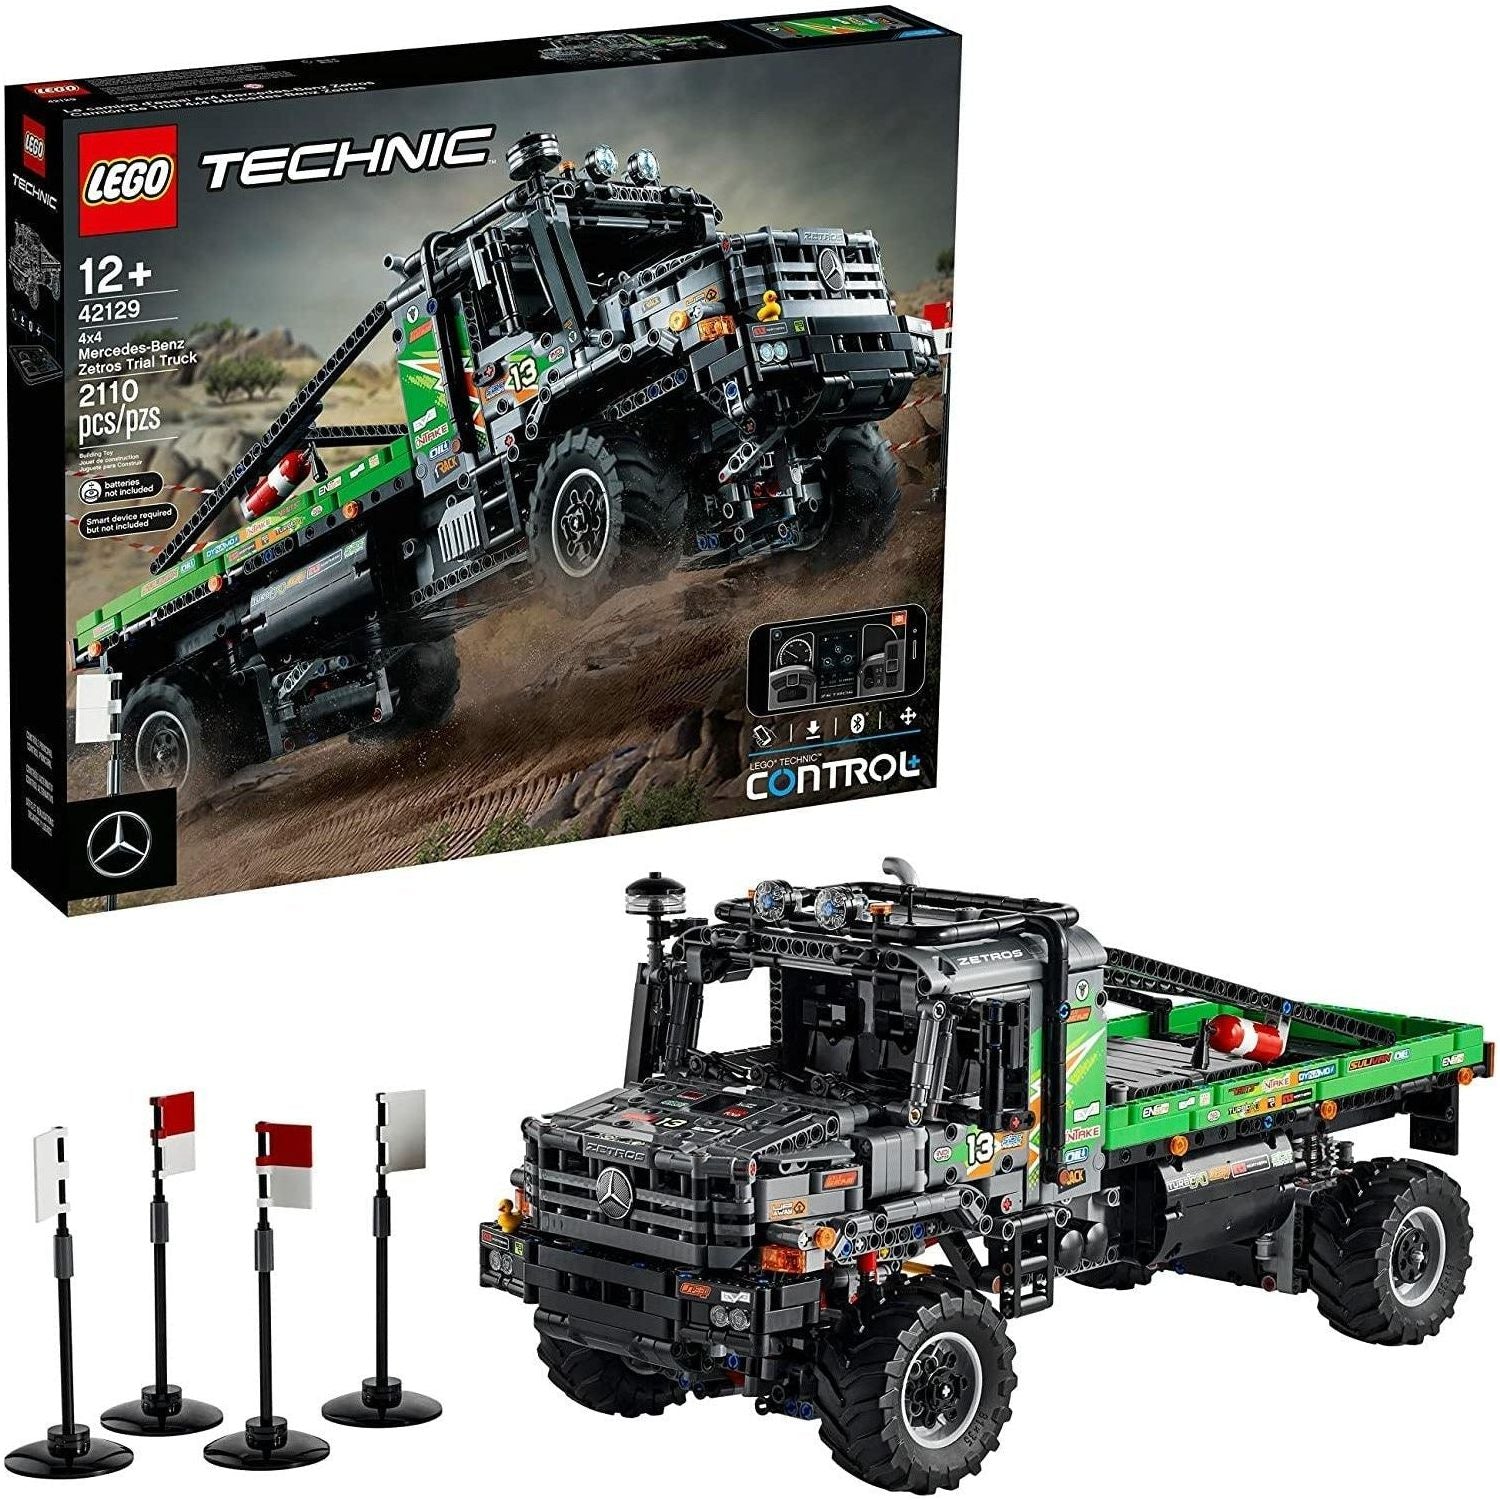 LEGO Technic 4x4 Mercedes-Benz Zetros Trial Truck 42129 Building Kit; (2,110 Pieces) - BumbleToys - 14 Years & Up, 8-13 Years, Boys, Cars, LEGO, OXE, Pre-Order, Technic